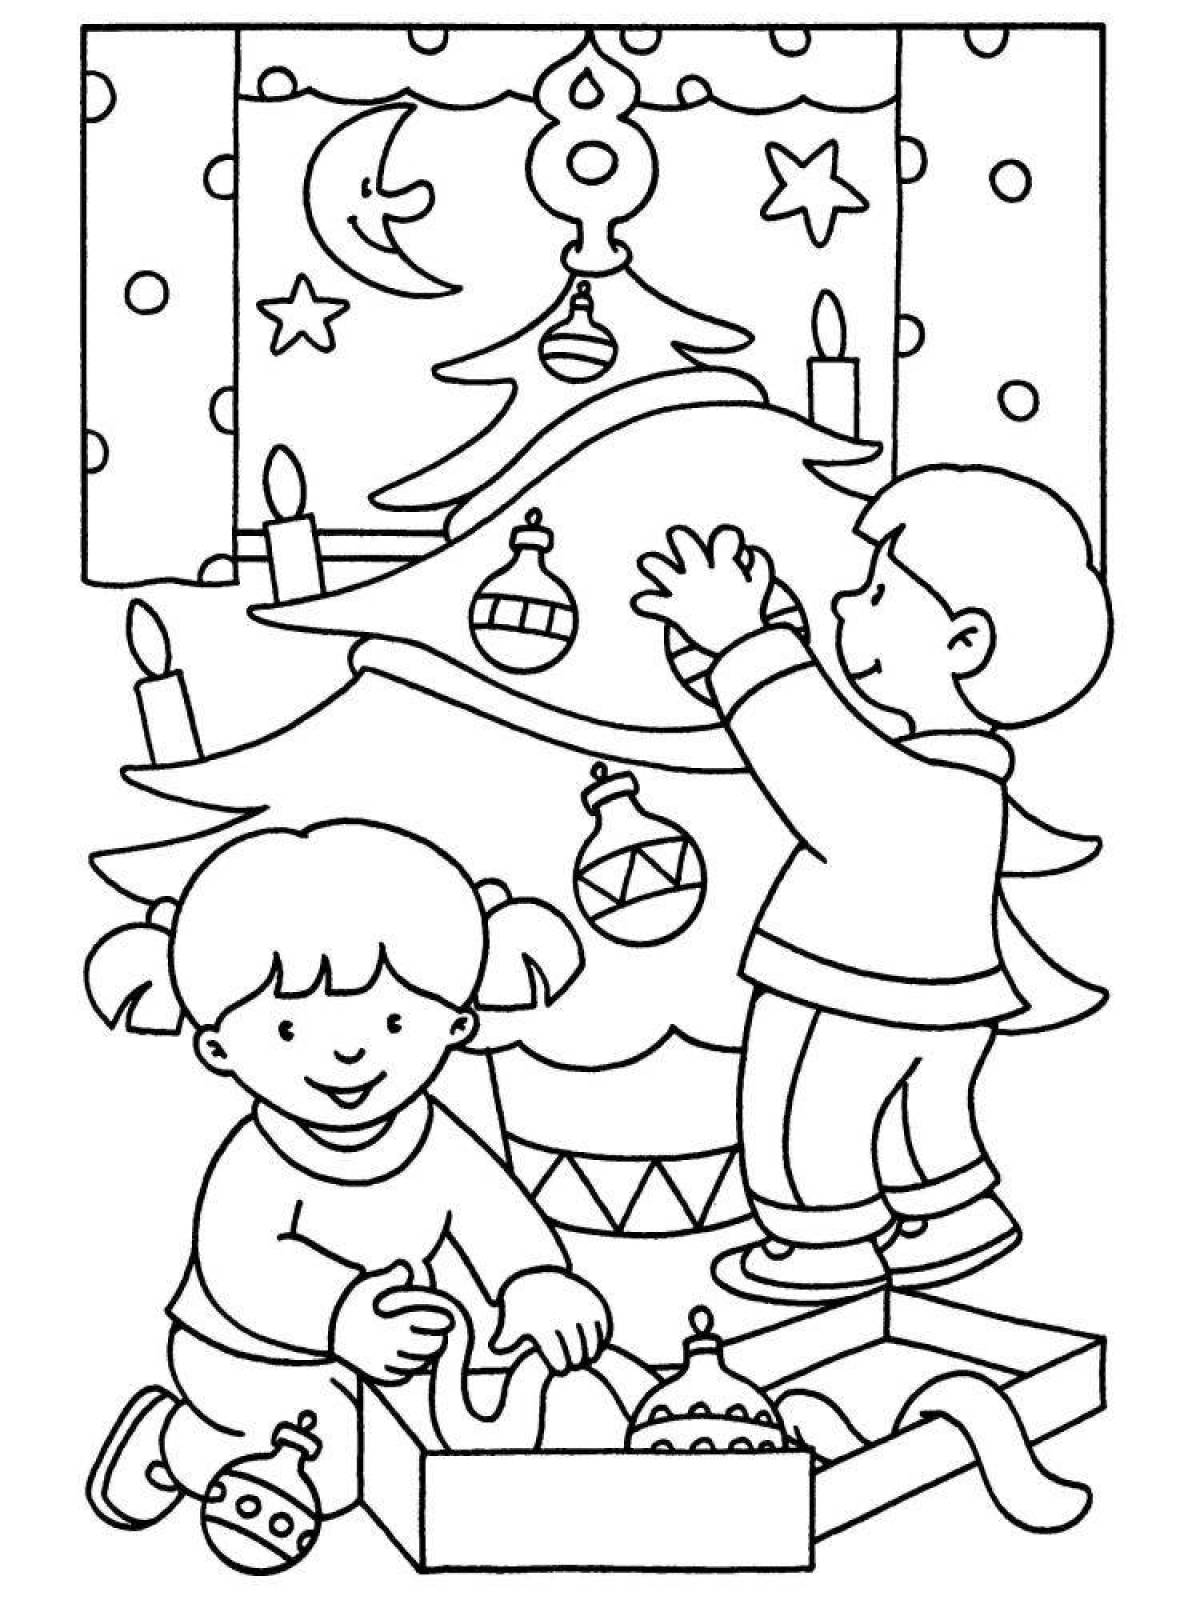 Whimsical Christmas coloring book for 6-7 year olds